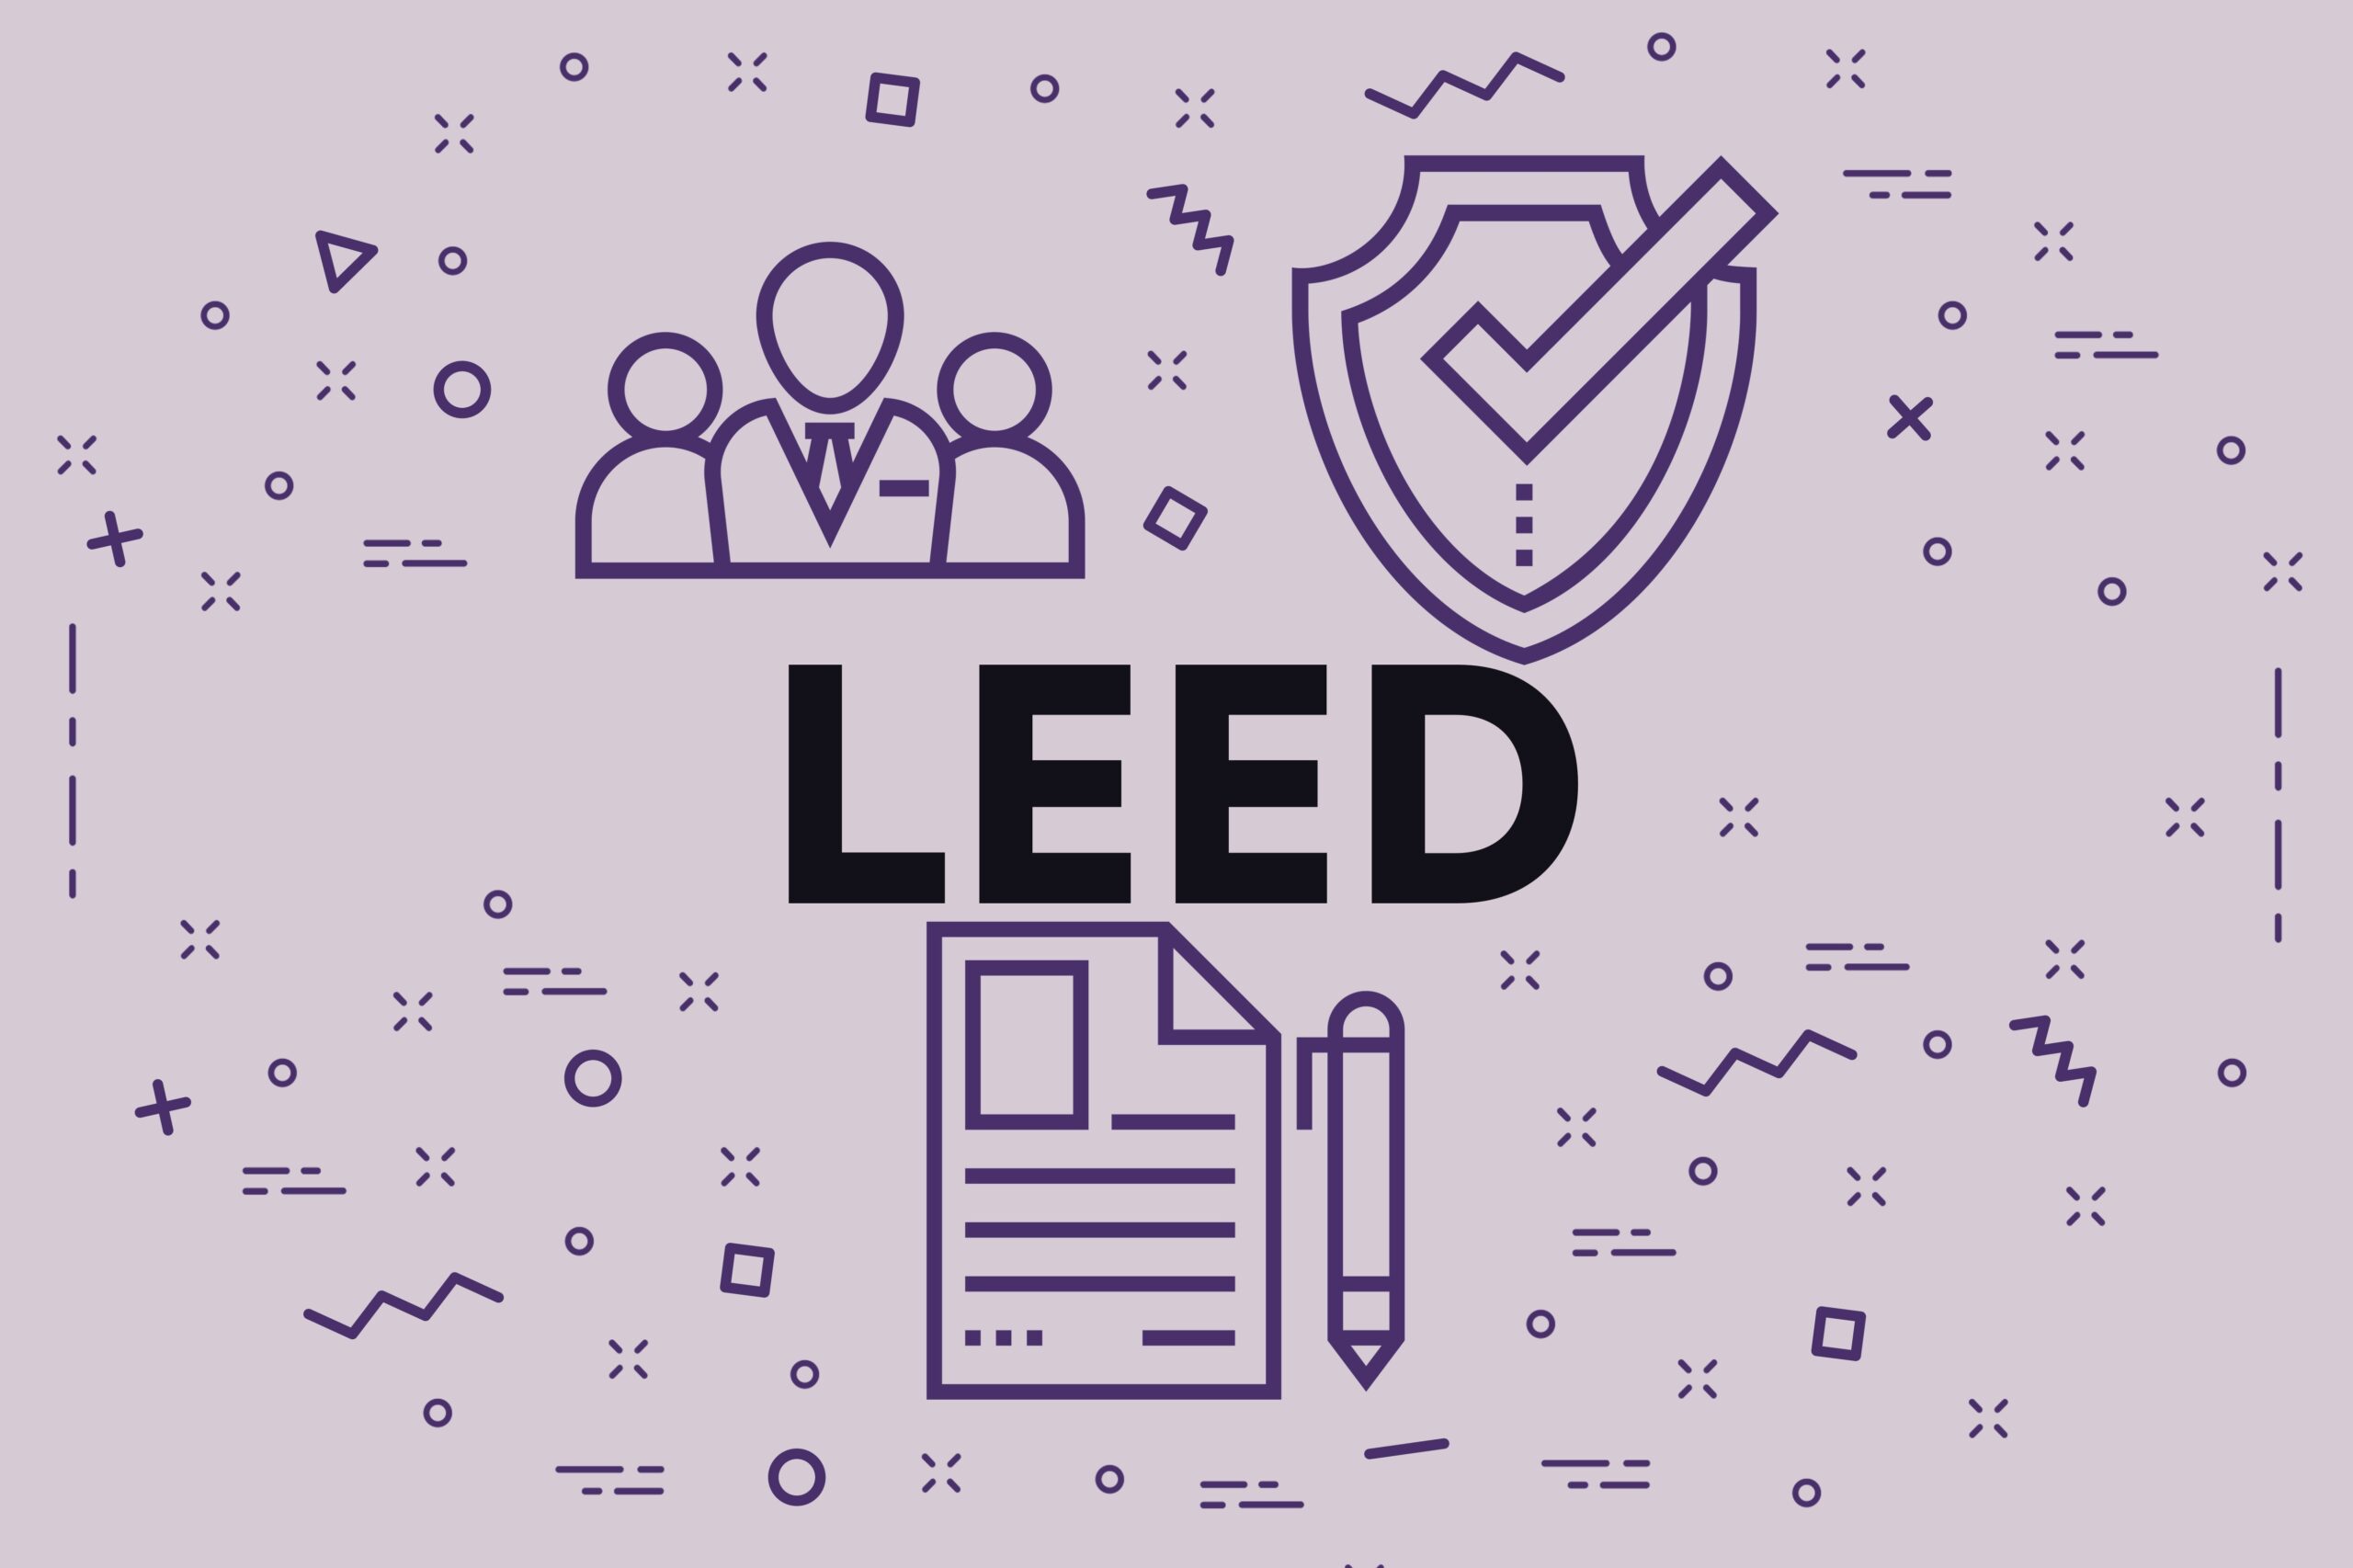 Light purple graphic with "LEED" spelled out and icons of a badge, pen, and paper.